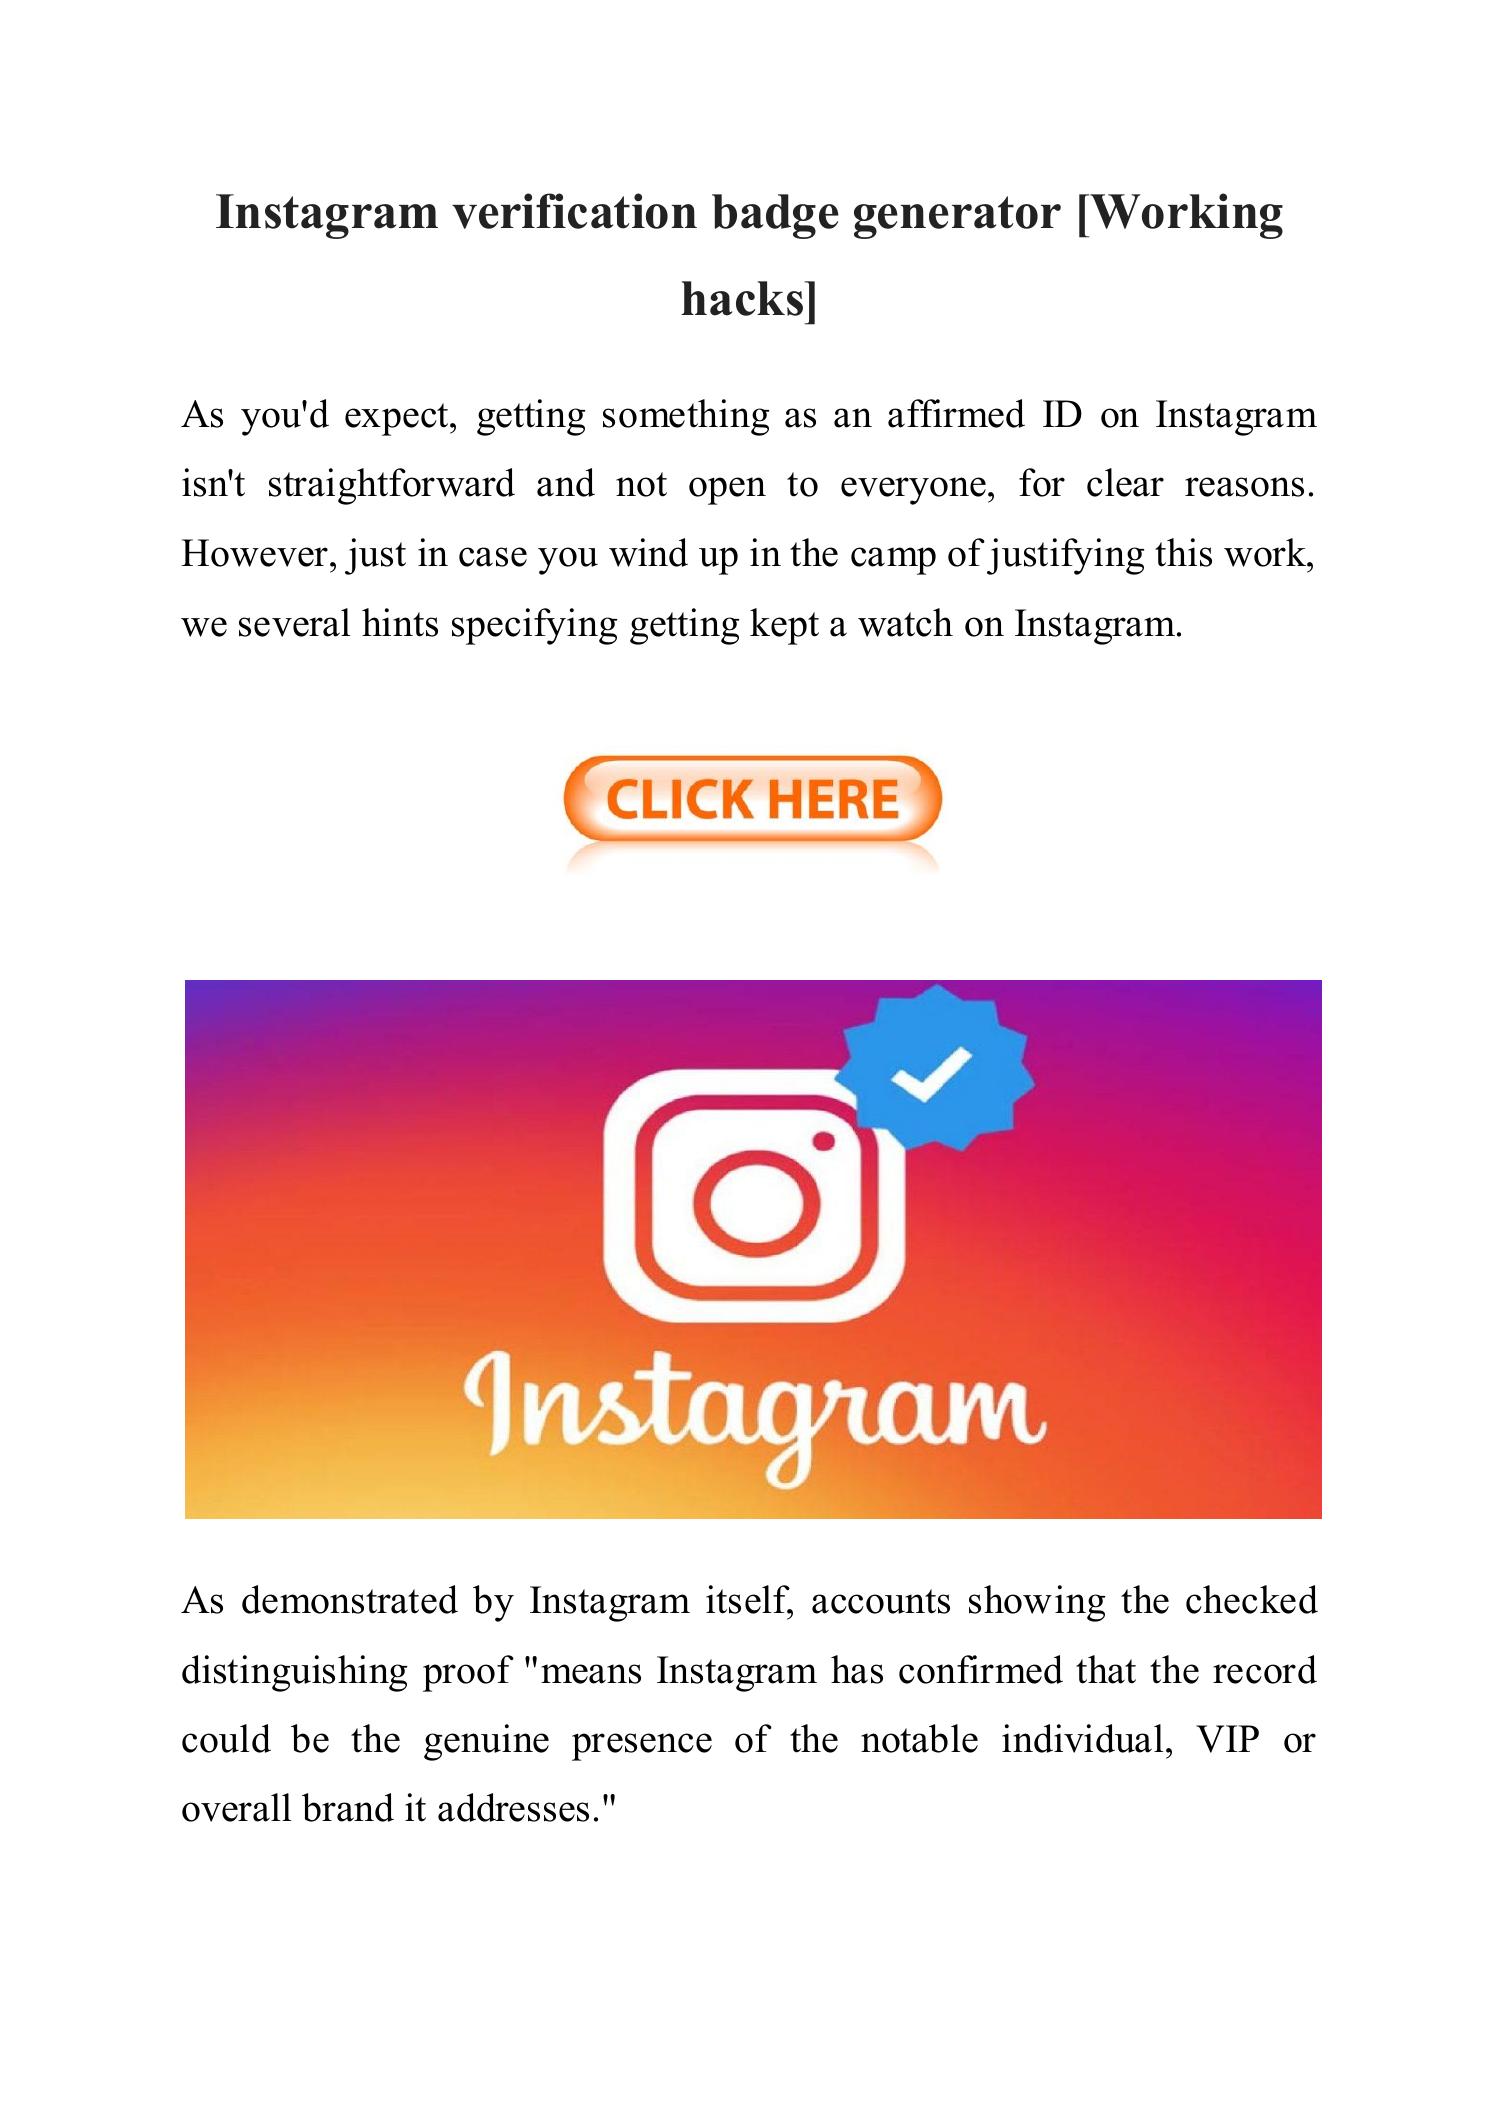 Instagram Verification: What is it and how does it work?